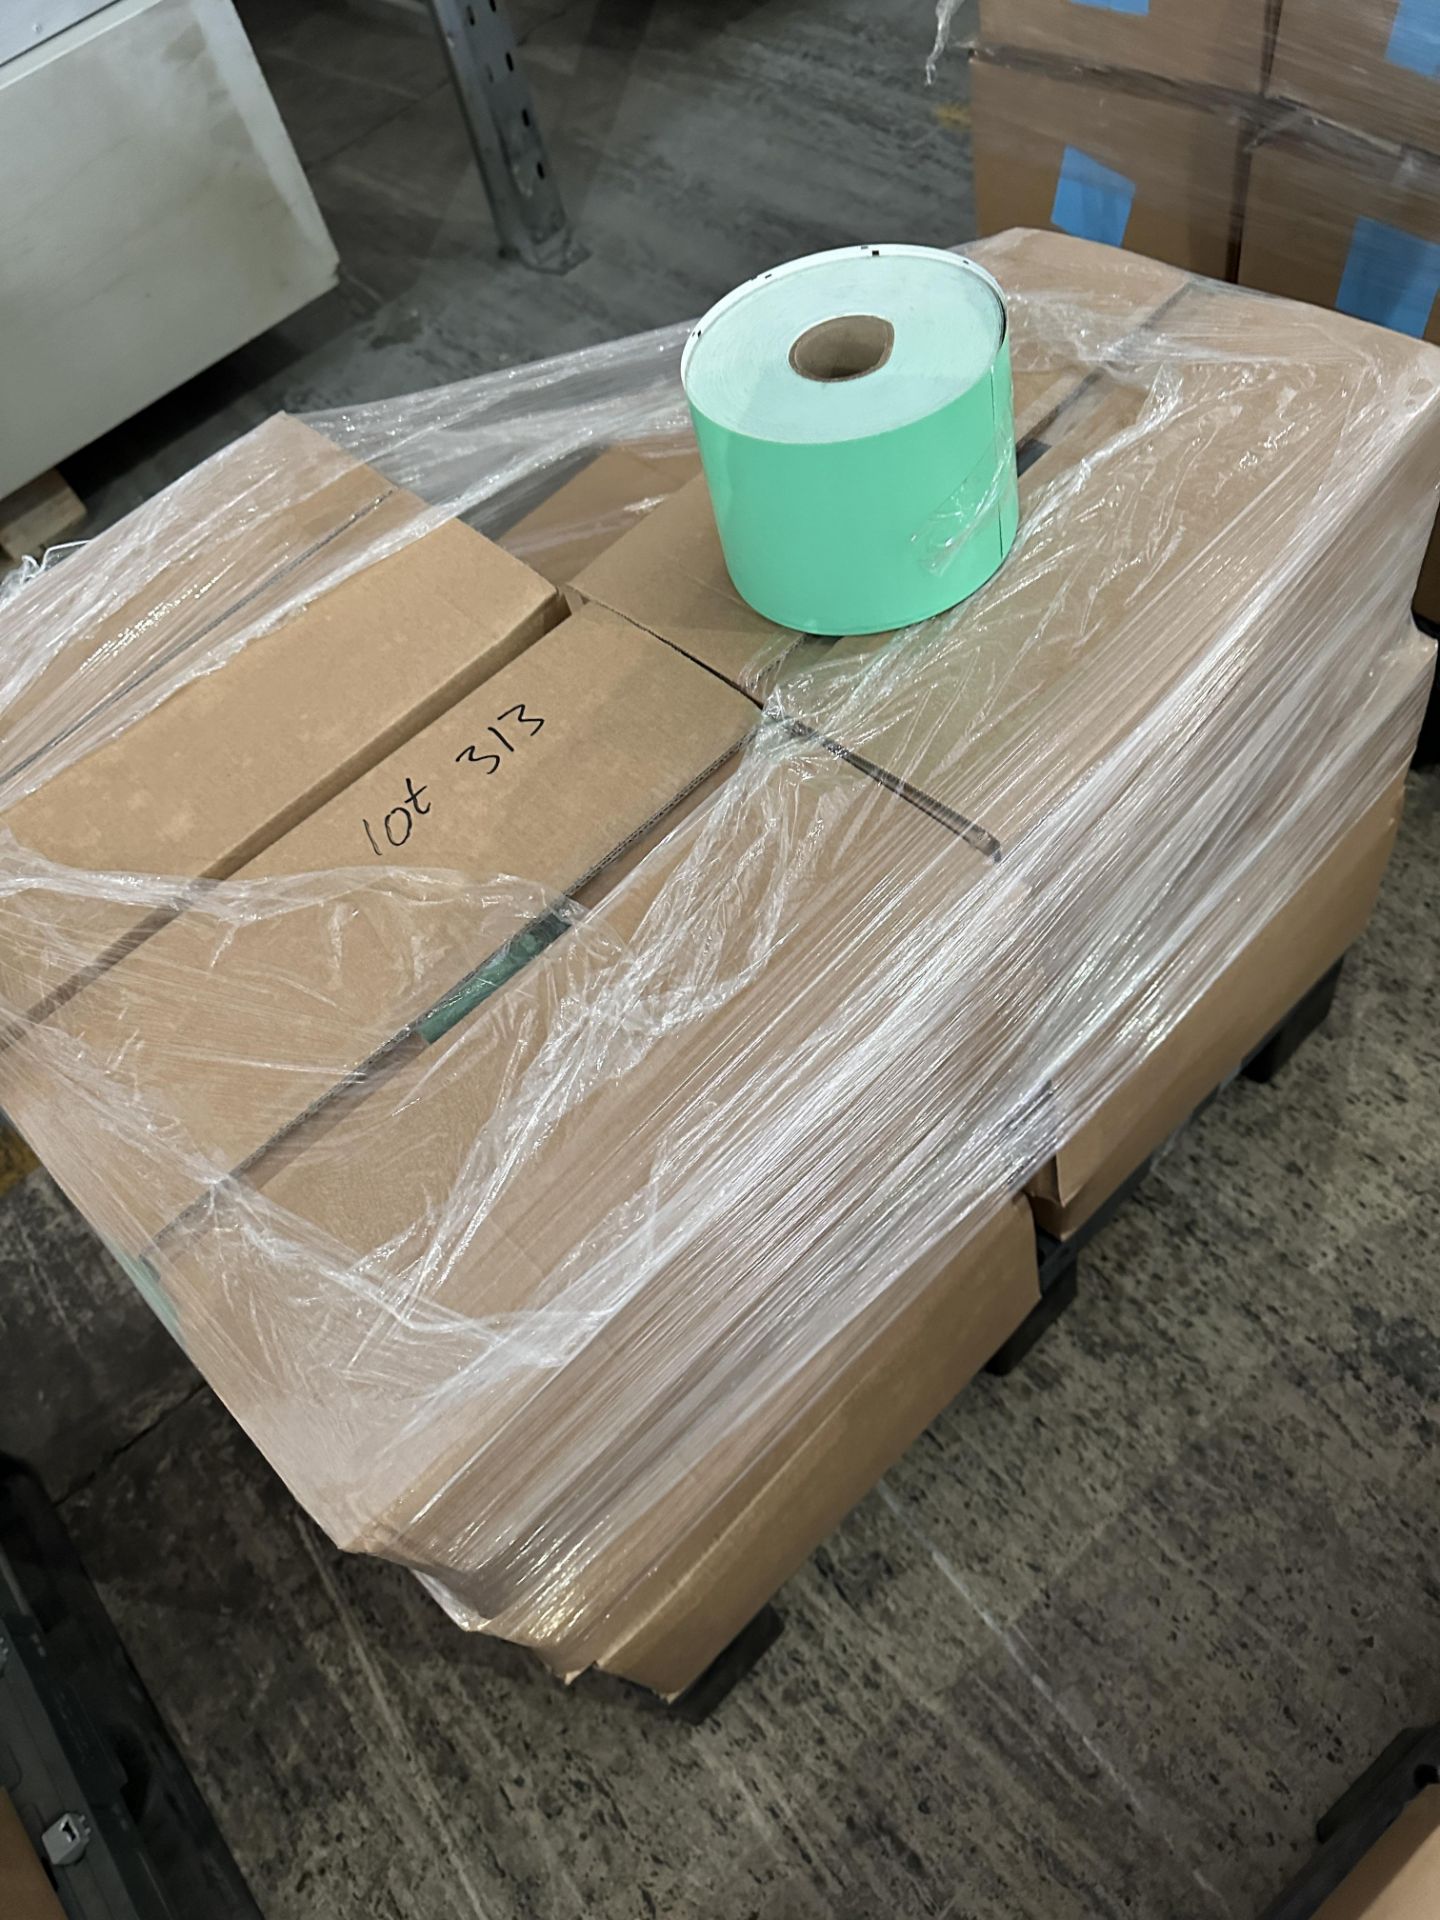 11 X BOXES OF GREEN SUPPLIER TAGS. - Image 2 of 2